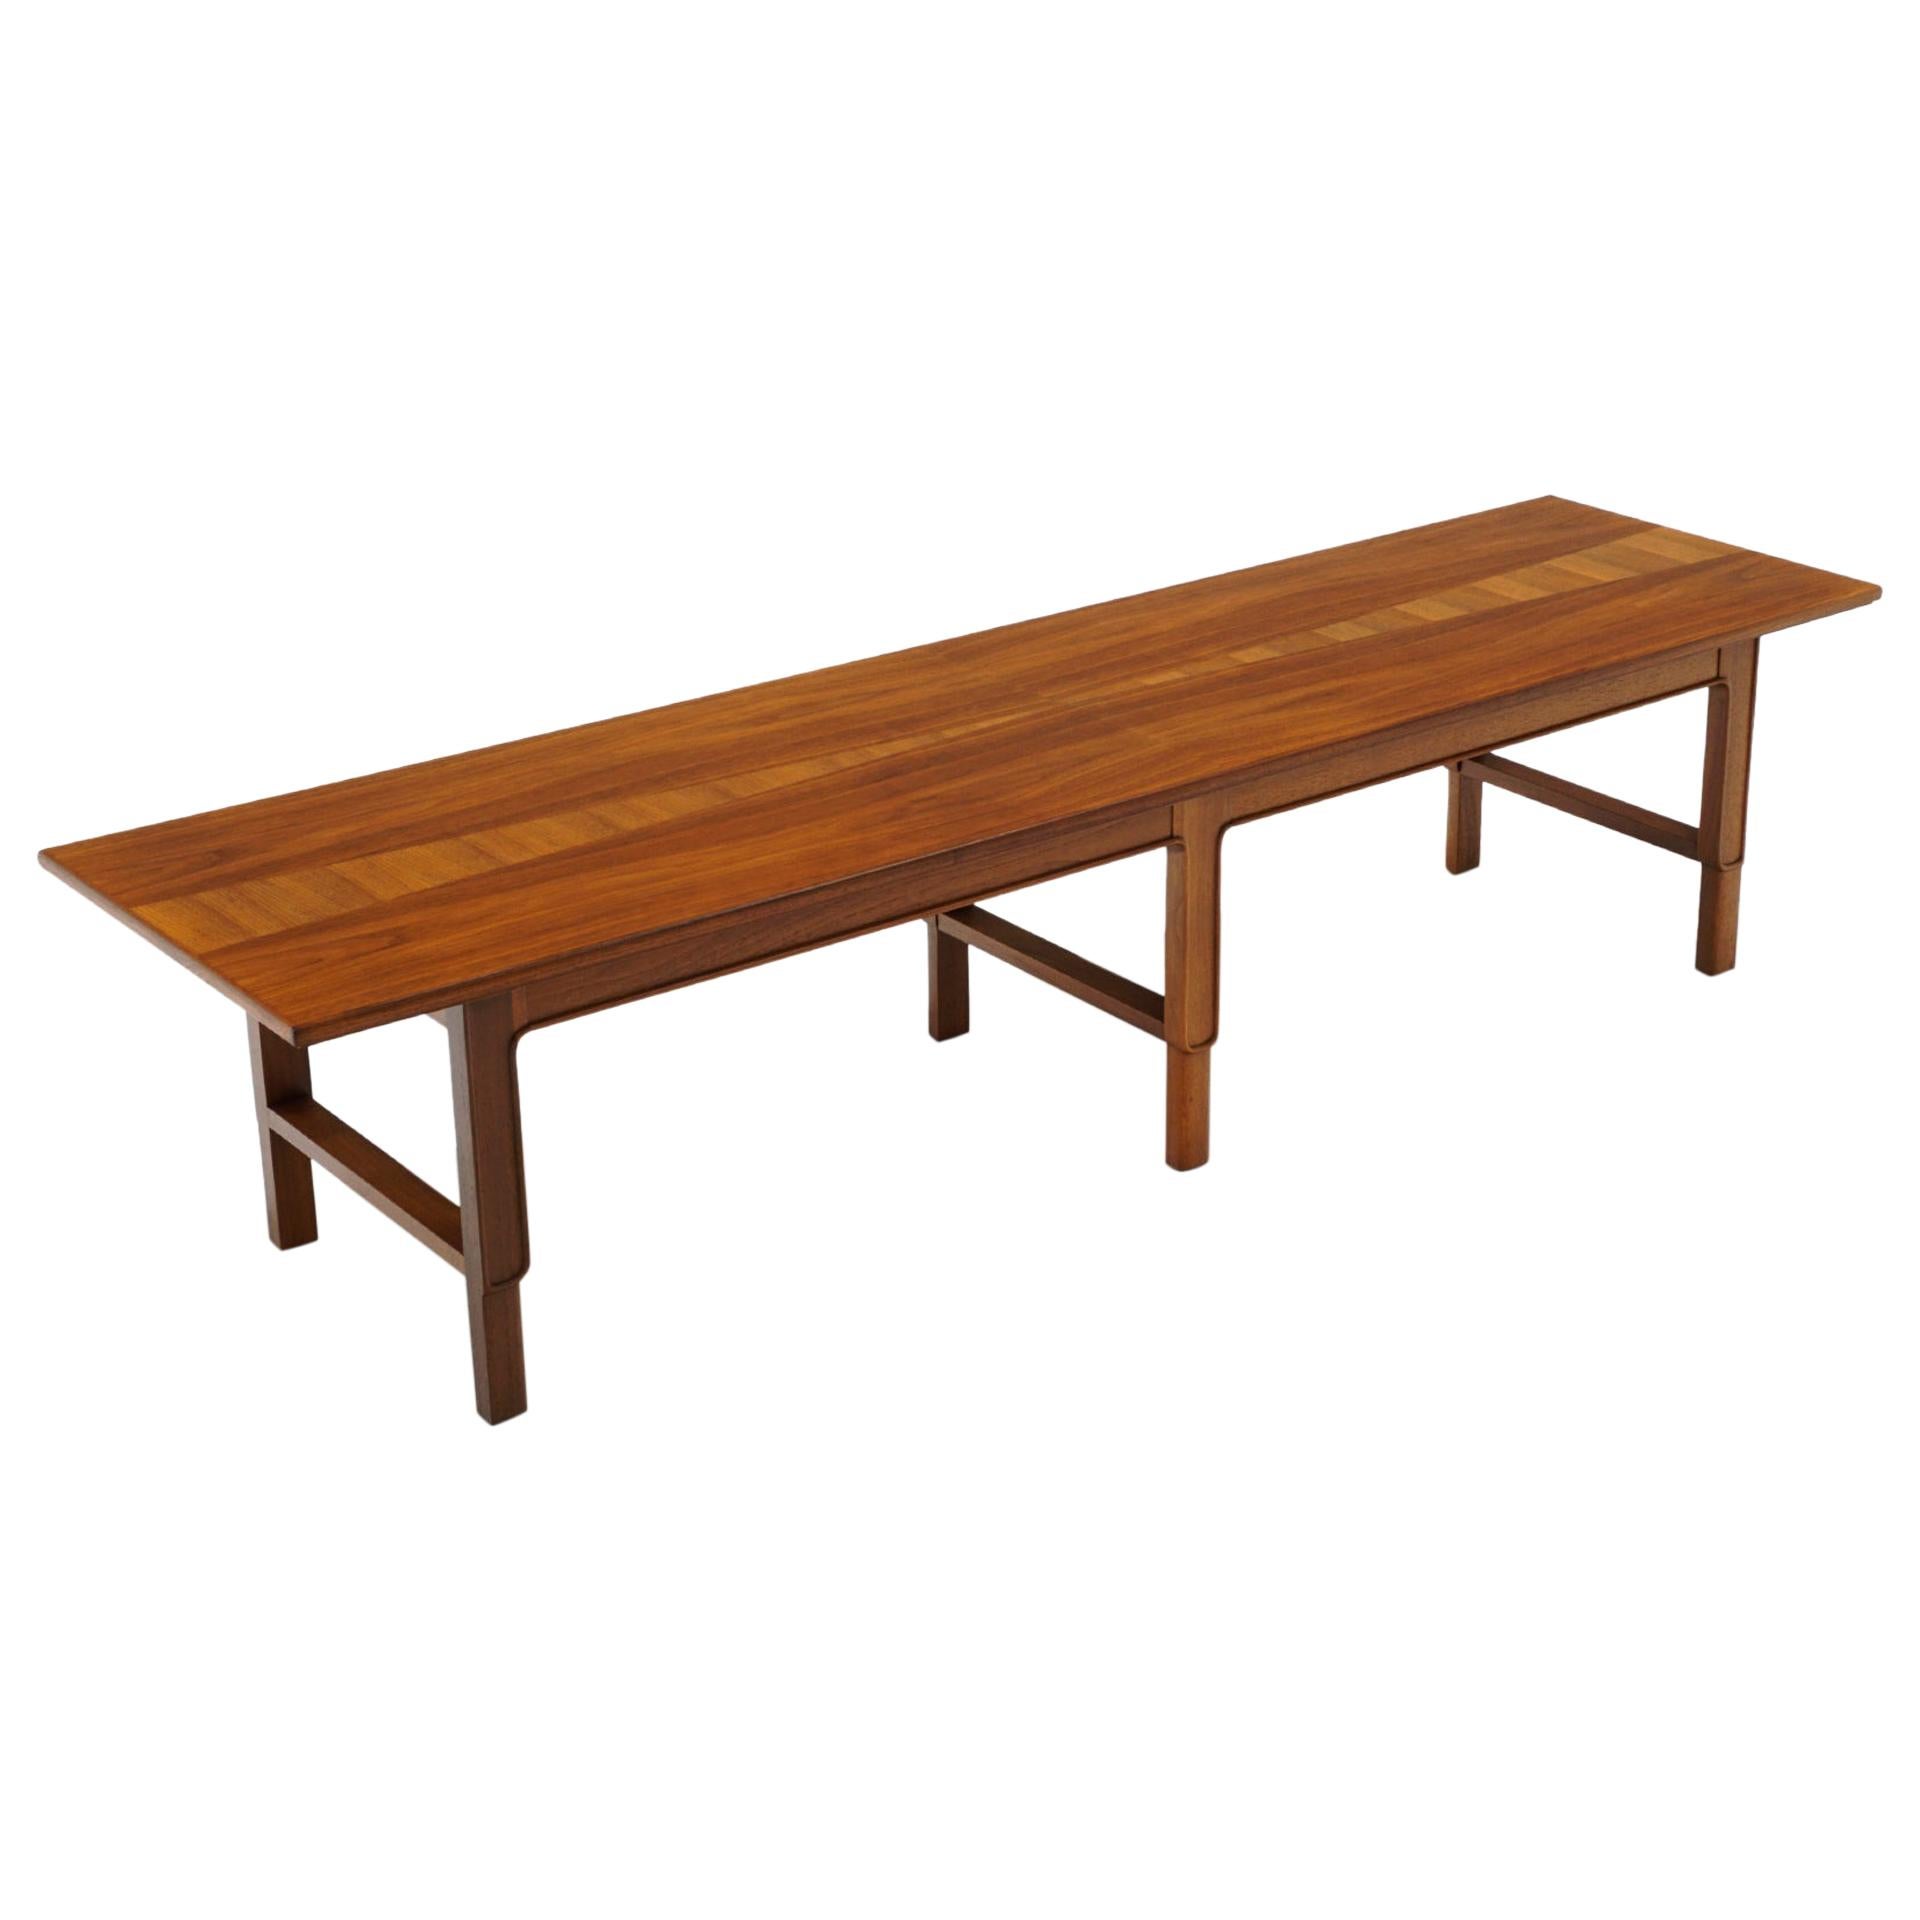 Walnut and Teak Coffee Table or Bench by Edward Wormley for Dunbar For Sale